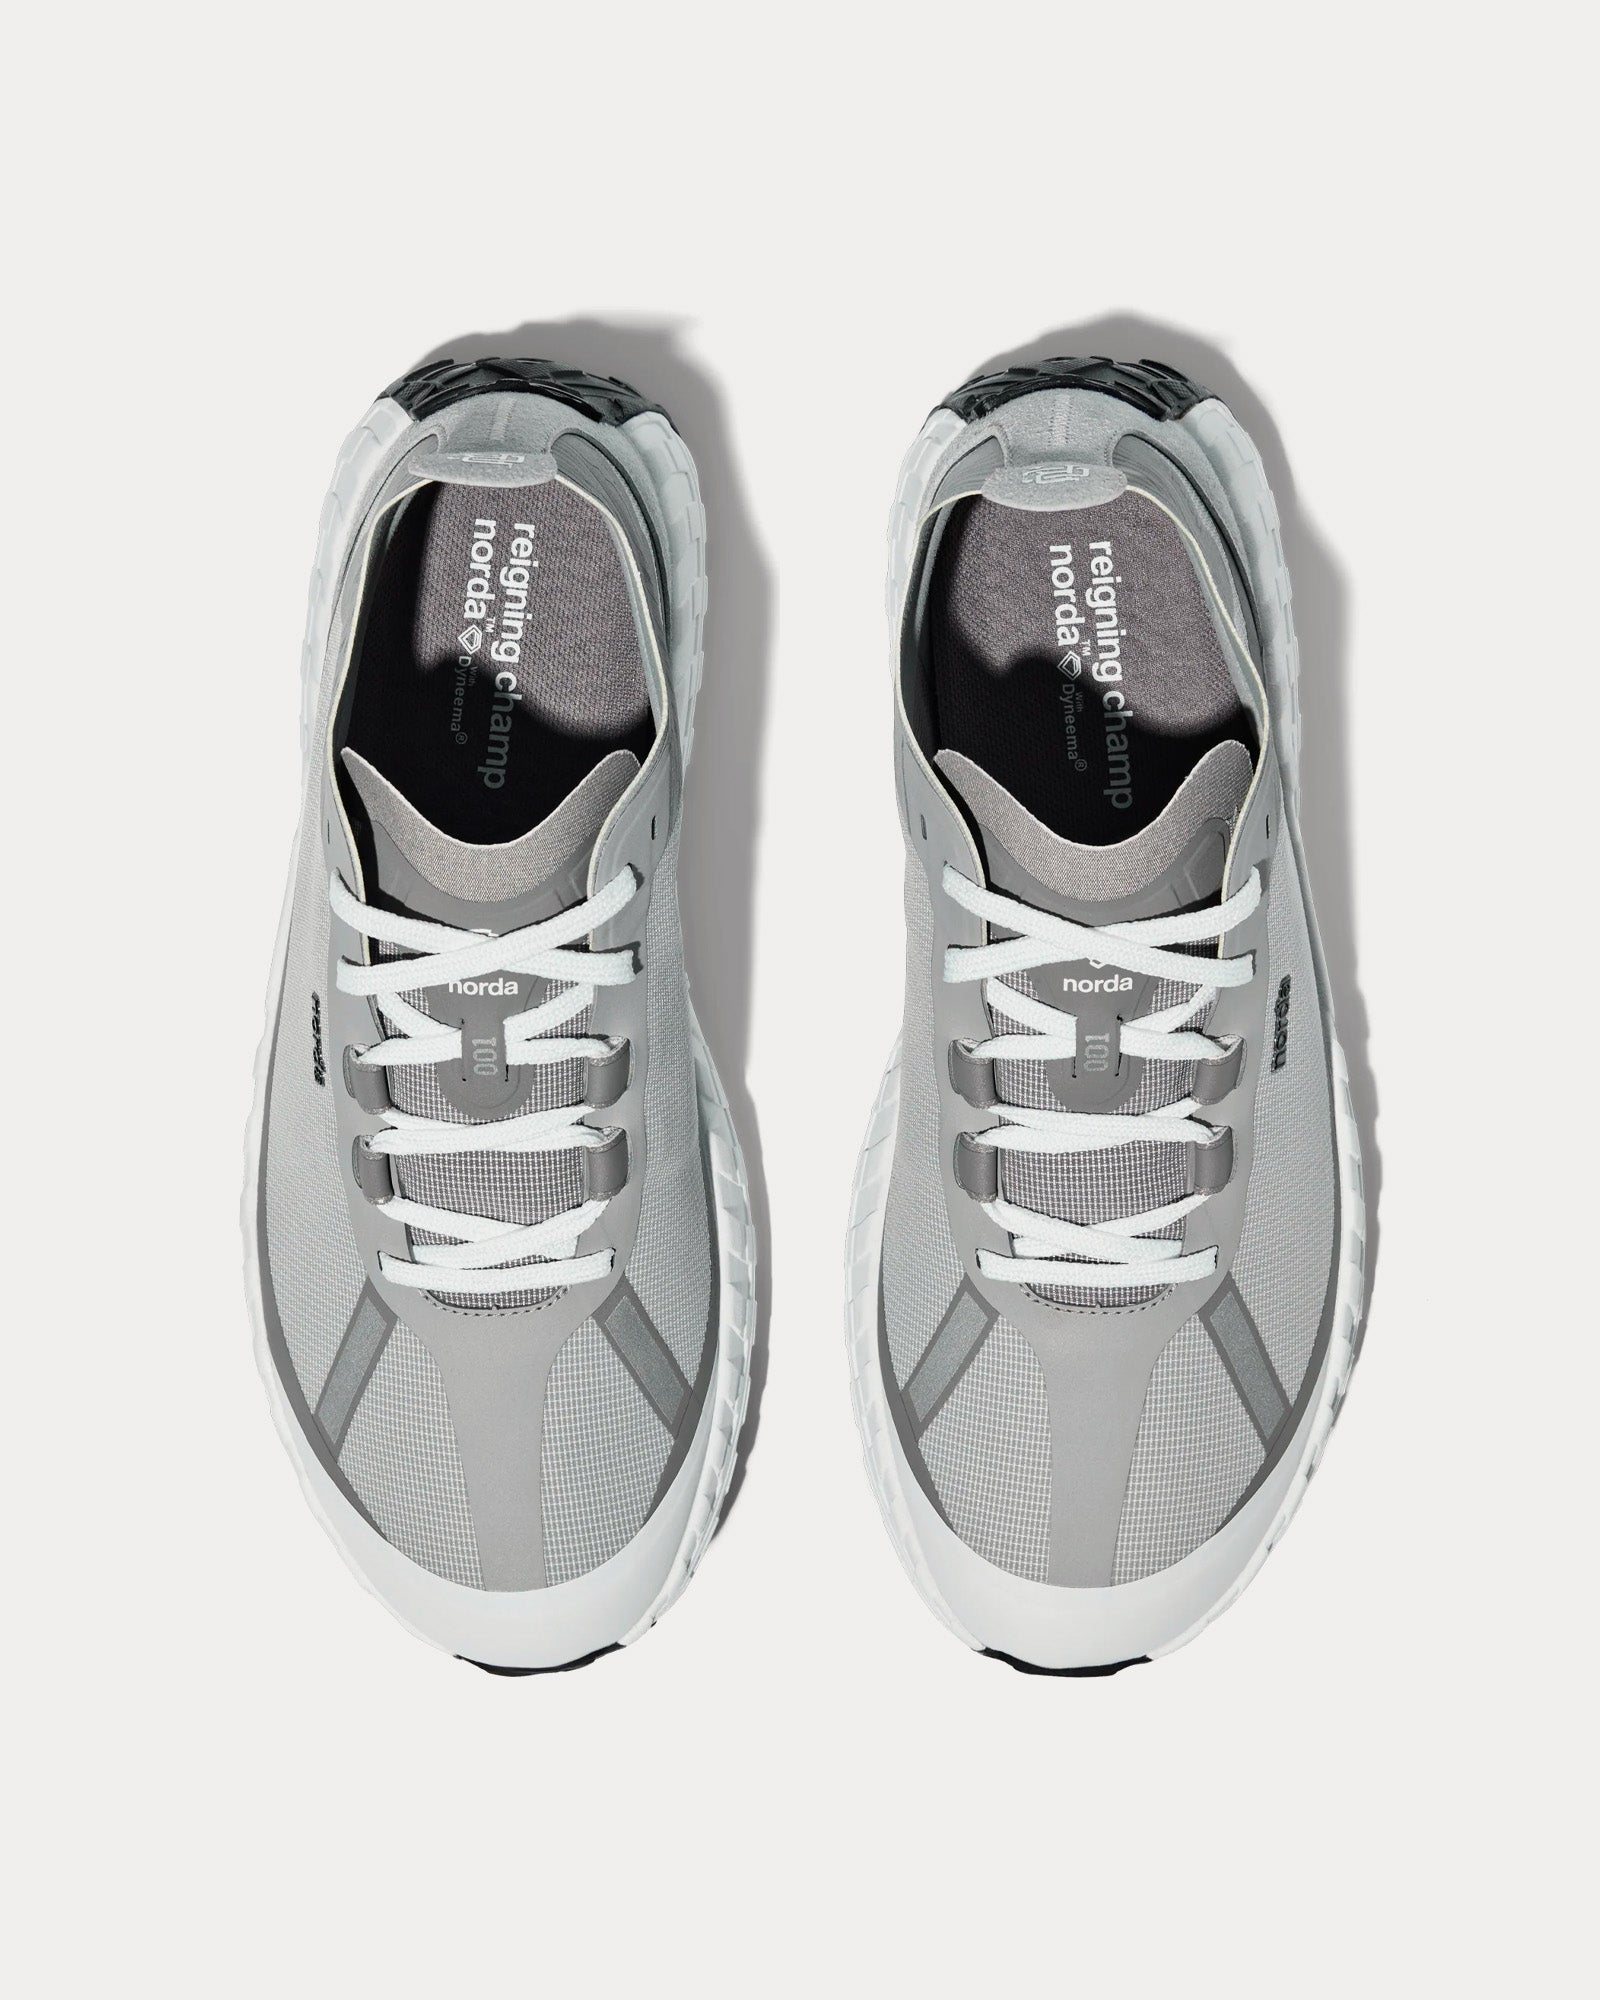 Norda x Reigning Champ - 001 M Heather Running Shoes